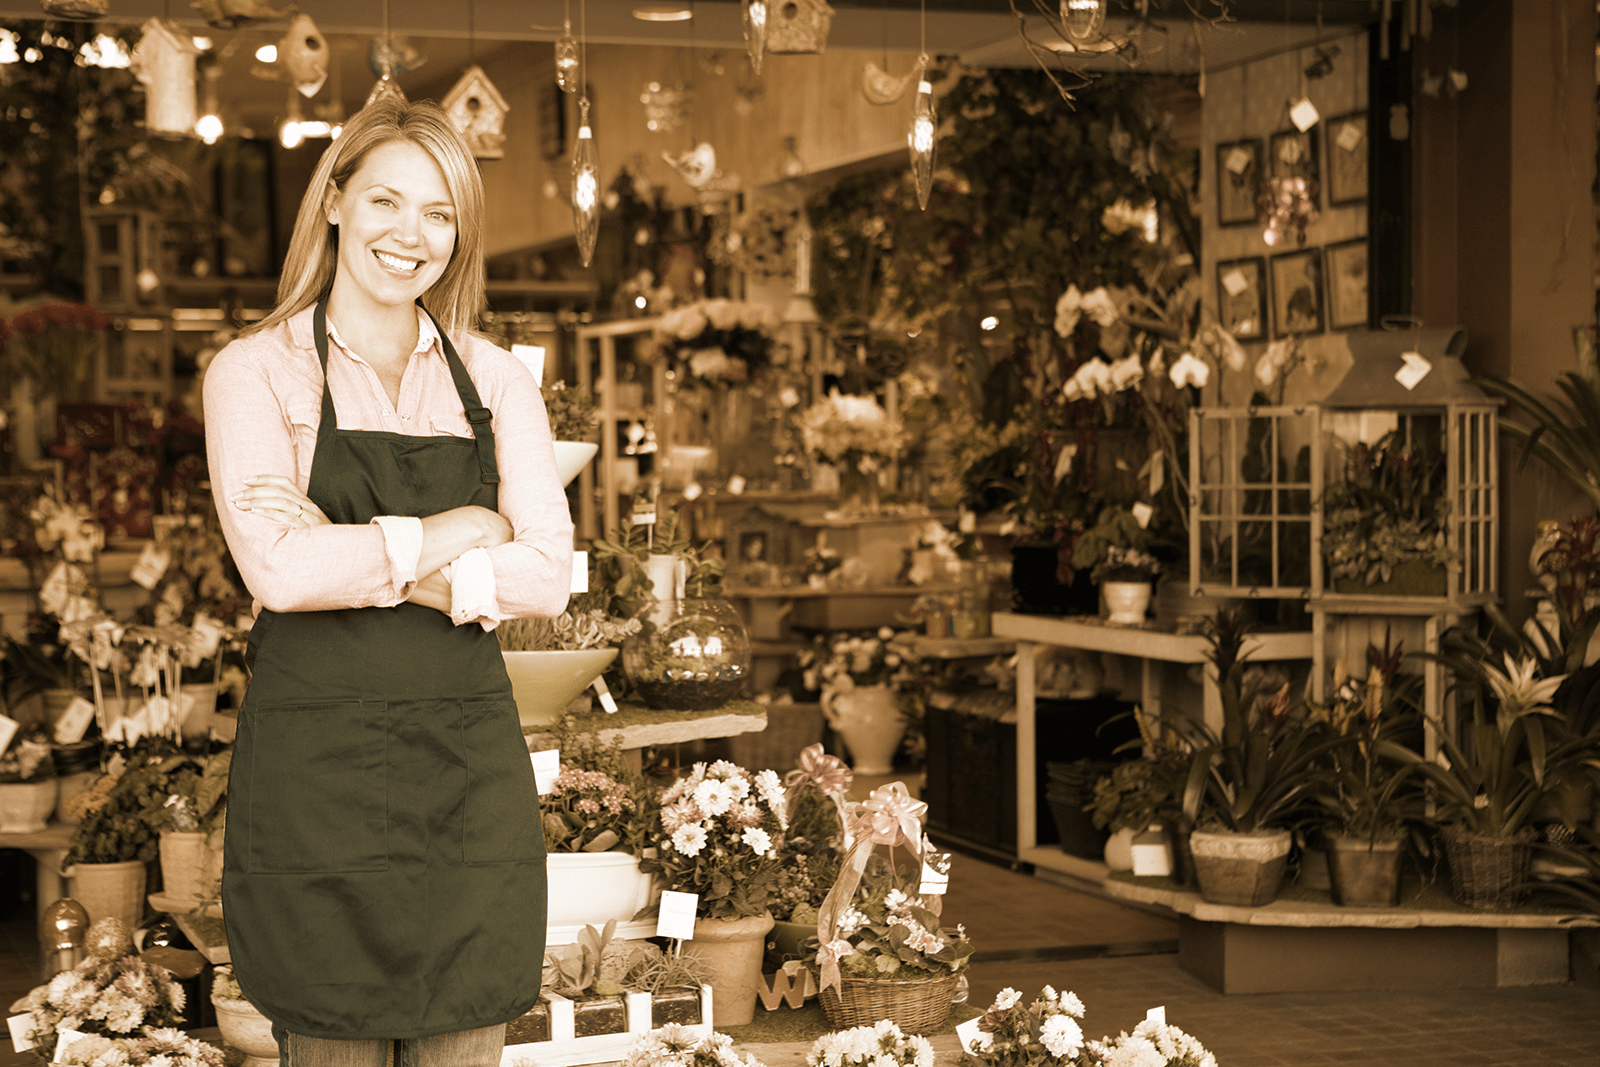 A woman stands smiling in front of her flower shop and needs local Utah SEO